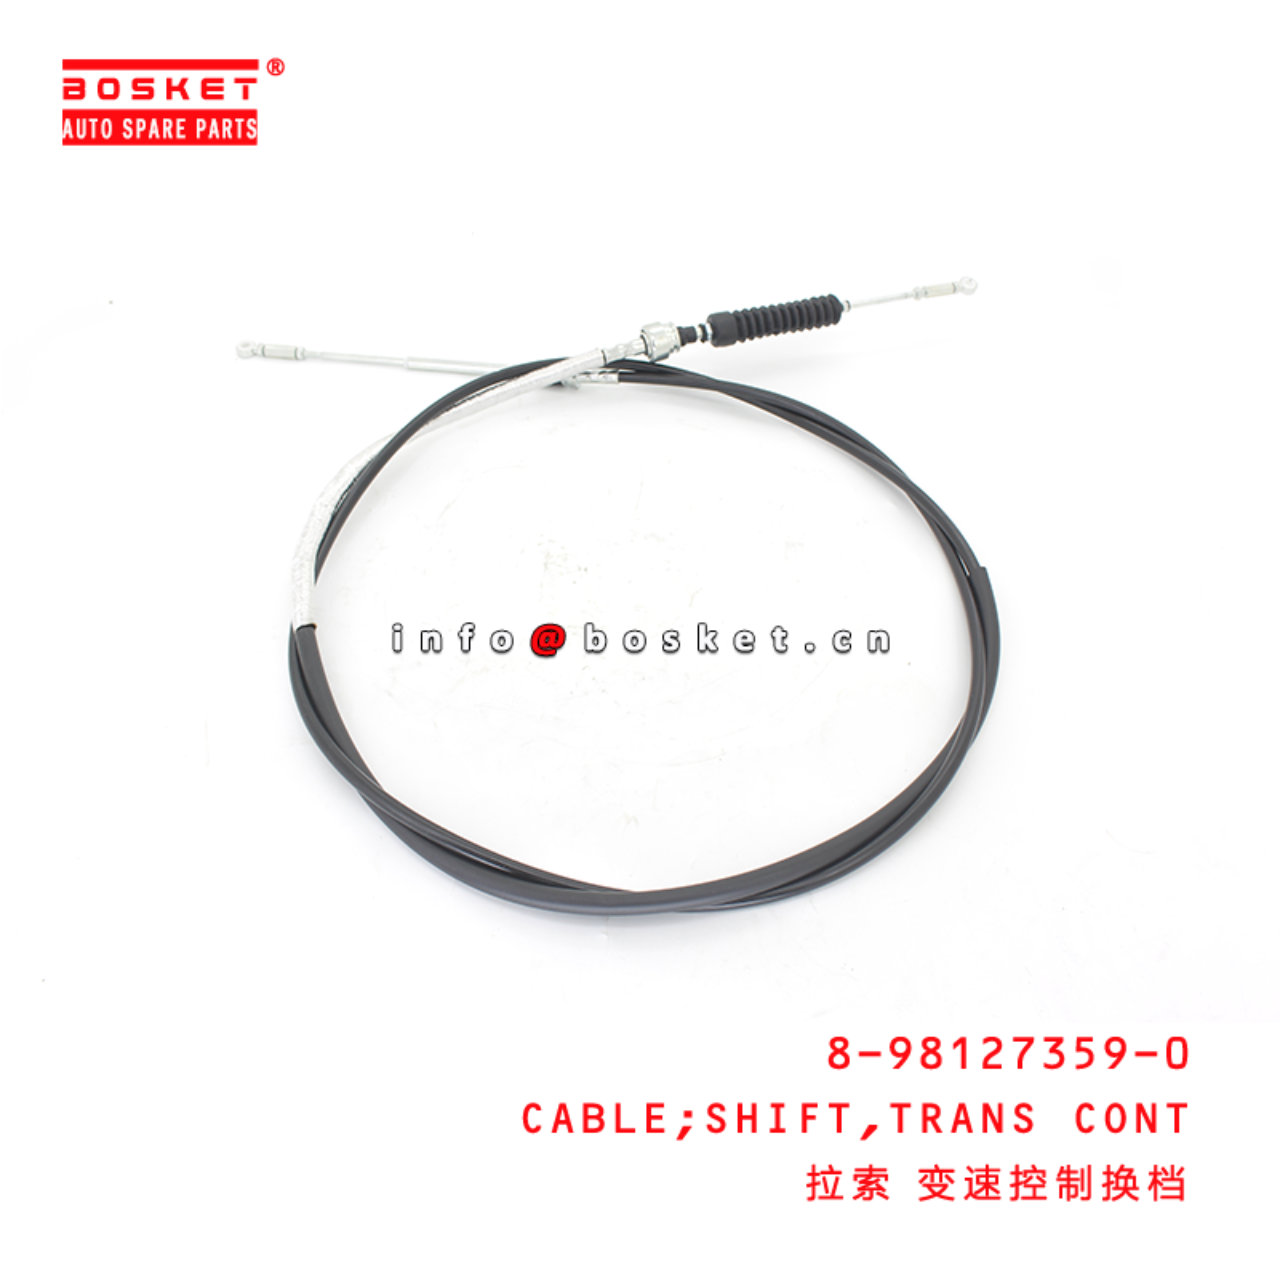 8-98127359-0 Transmission Control Shift Cable Suitable for ISUZU   8981273590